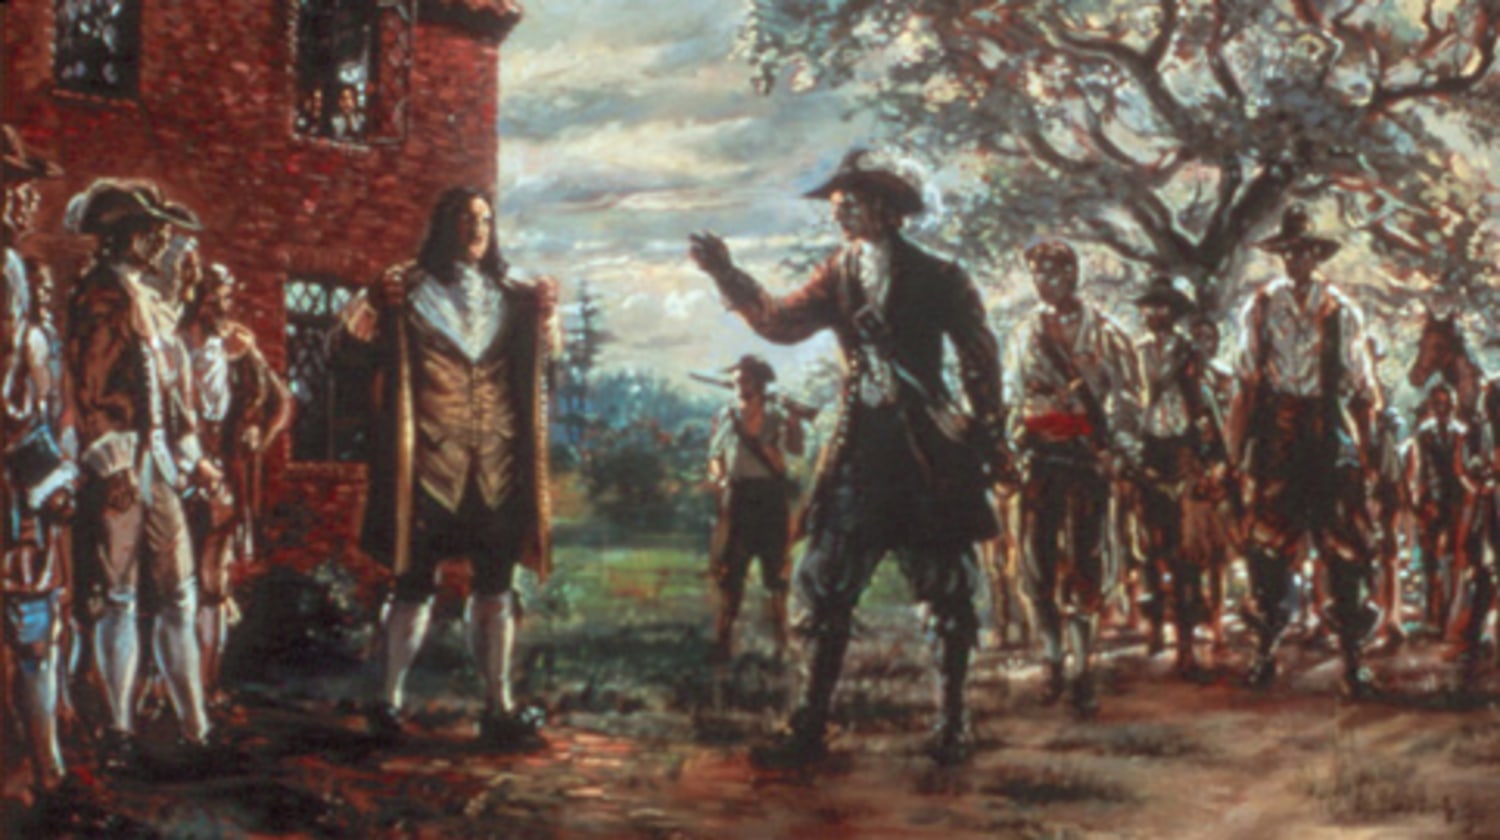 Bacon's Rebellion, 1676-1677: Race, Class, and Frontier Conflict